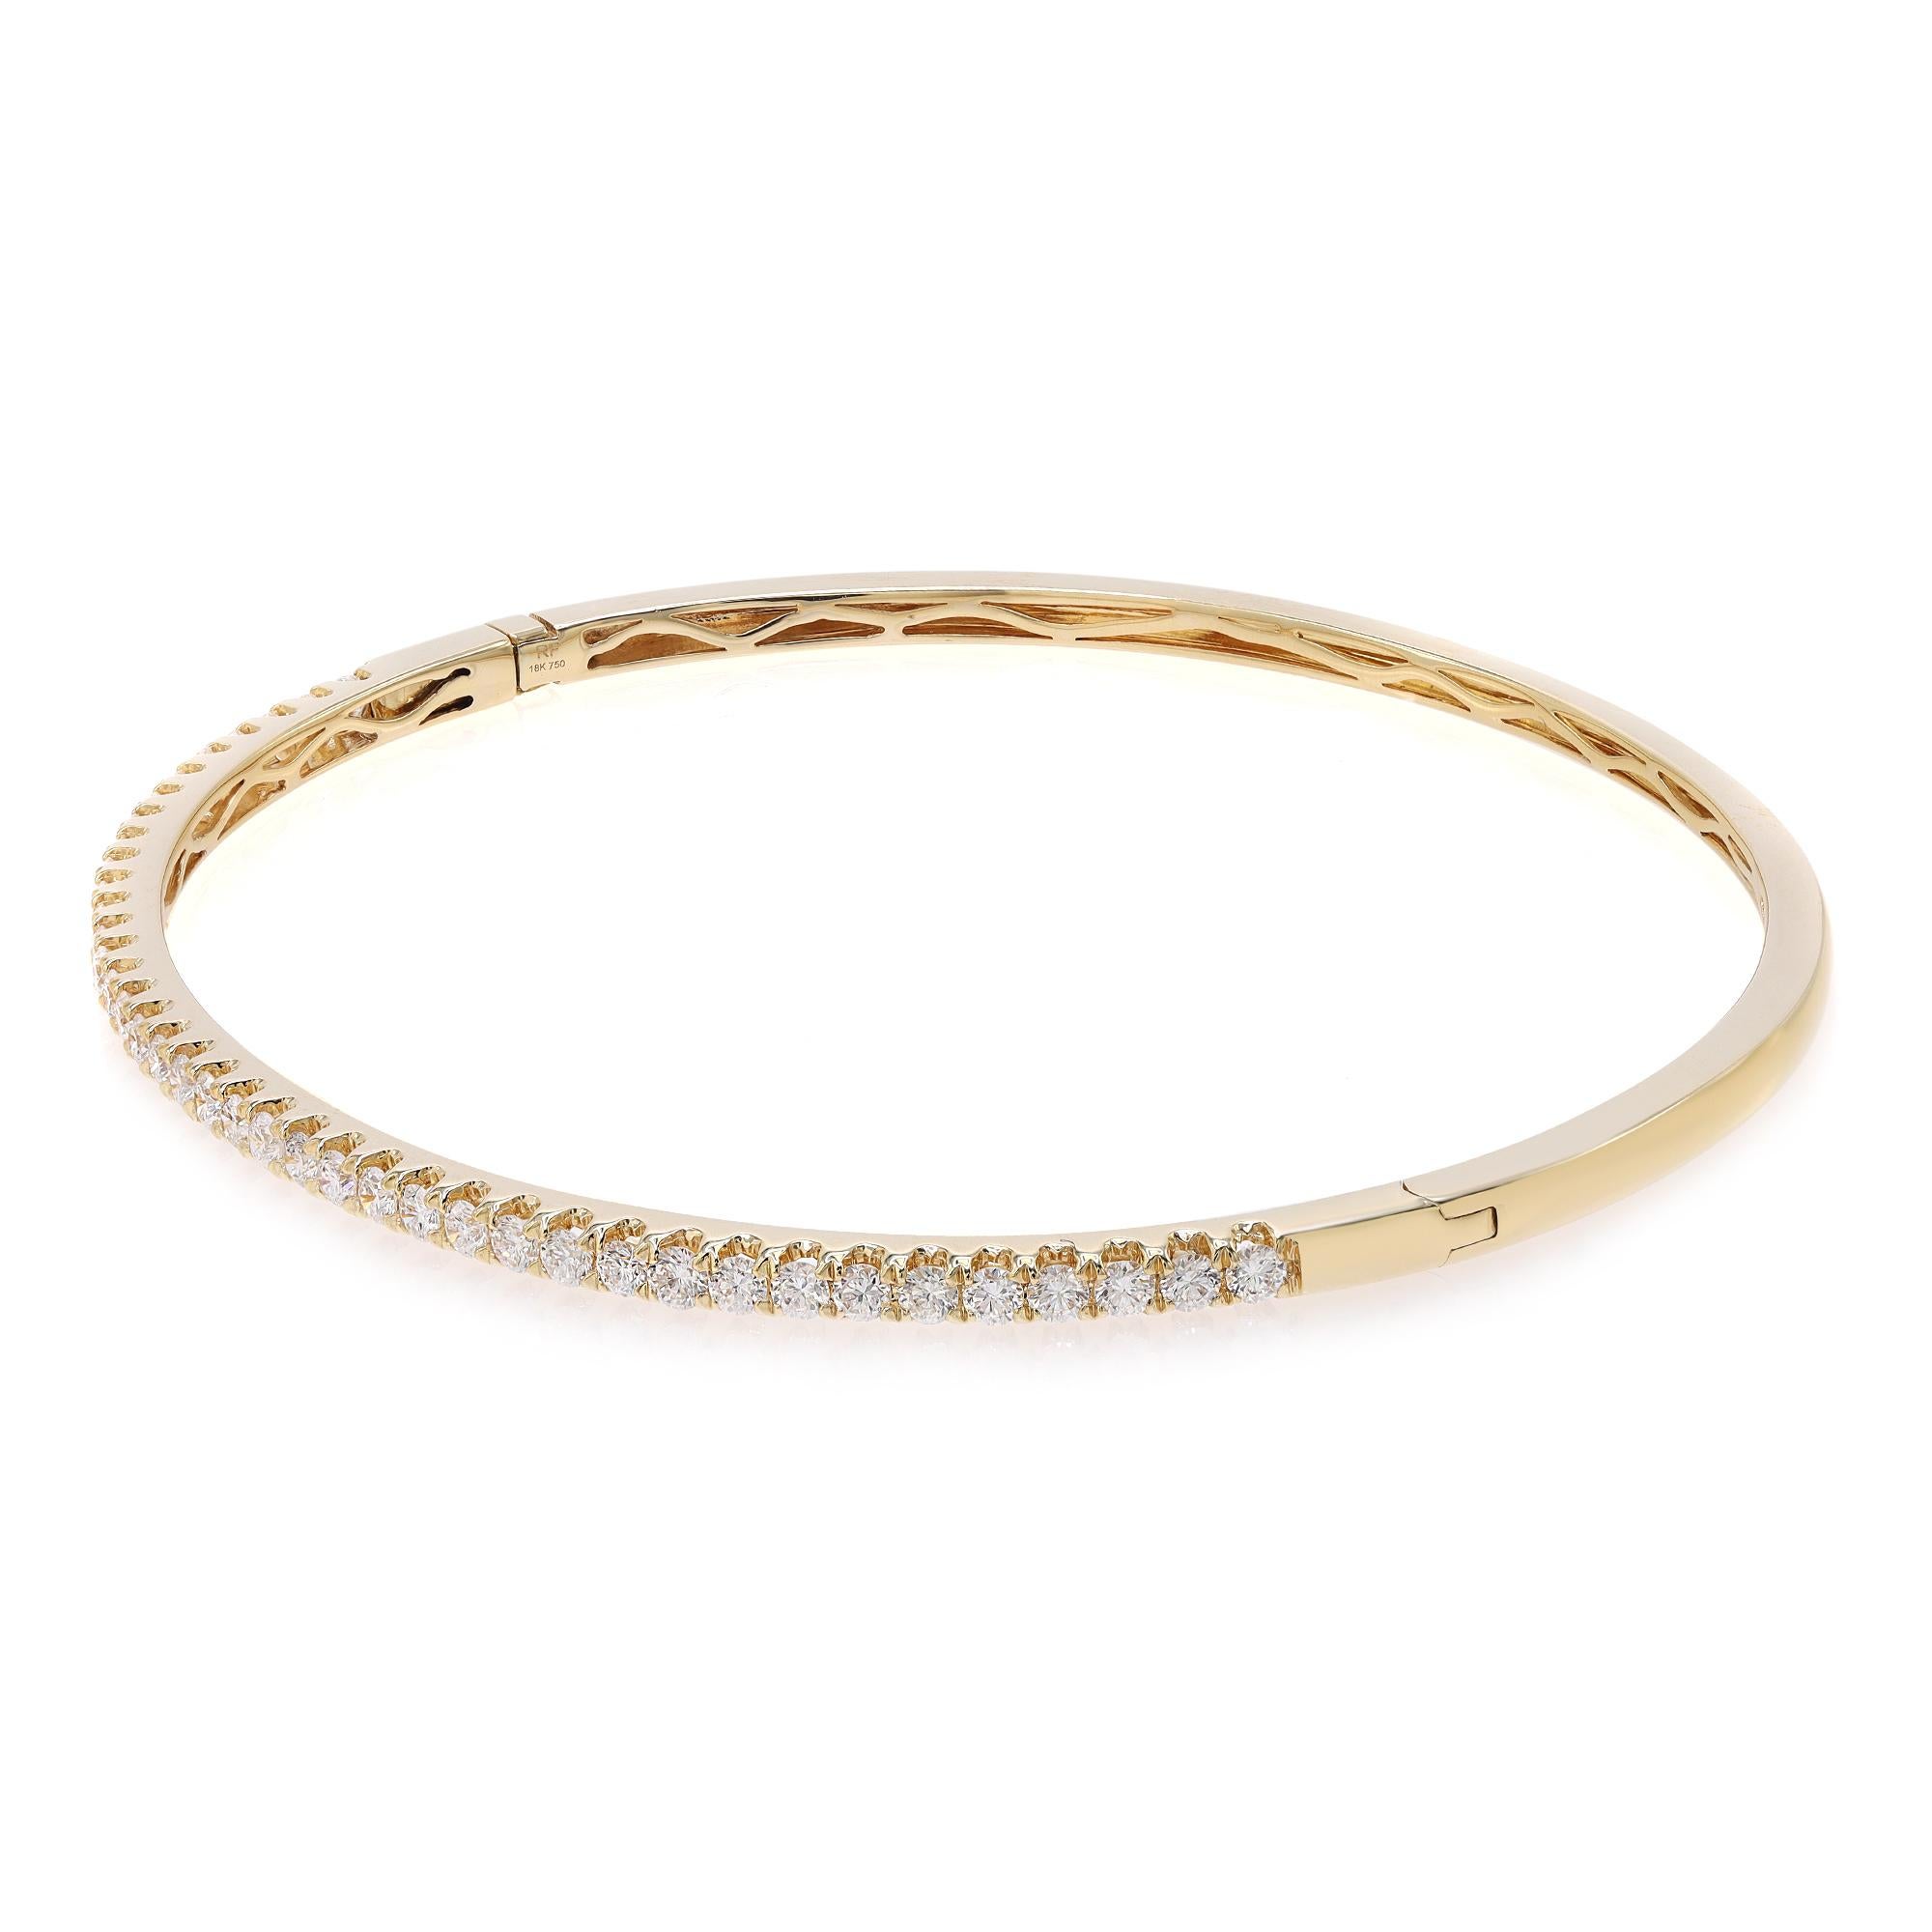 This beautifully crafted bangle bracelet features round brilliant cut diamonds set halfway through the bangle in four prong setting. Crafted in 18k yellow gold. Total diamond weight: 1.00 carats. Diamond Quality: F-G color and SI clarity. Wrist